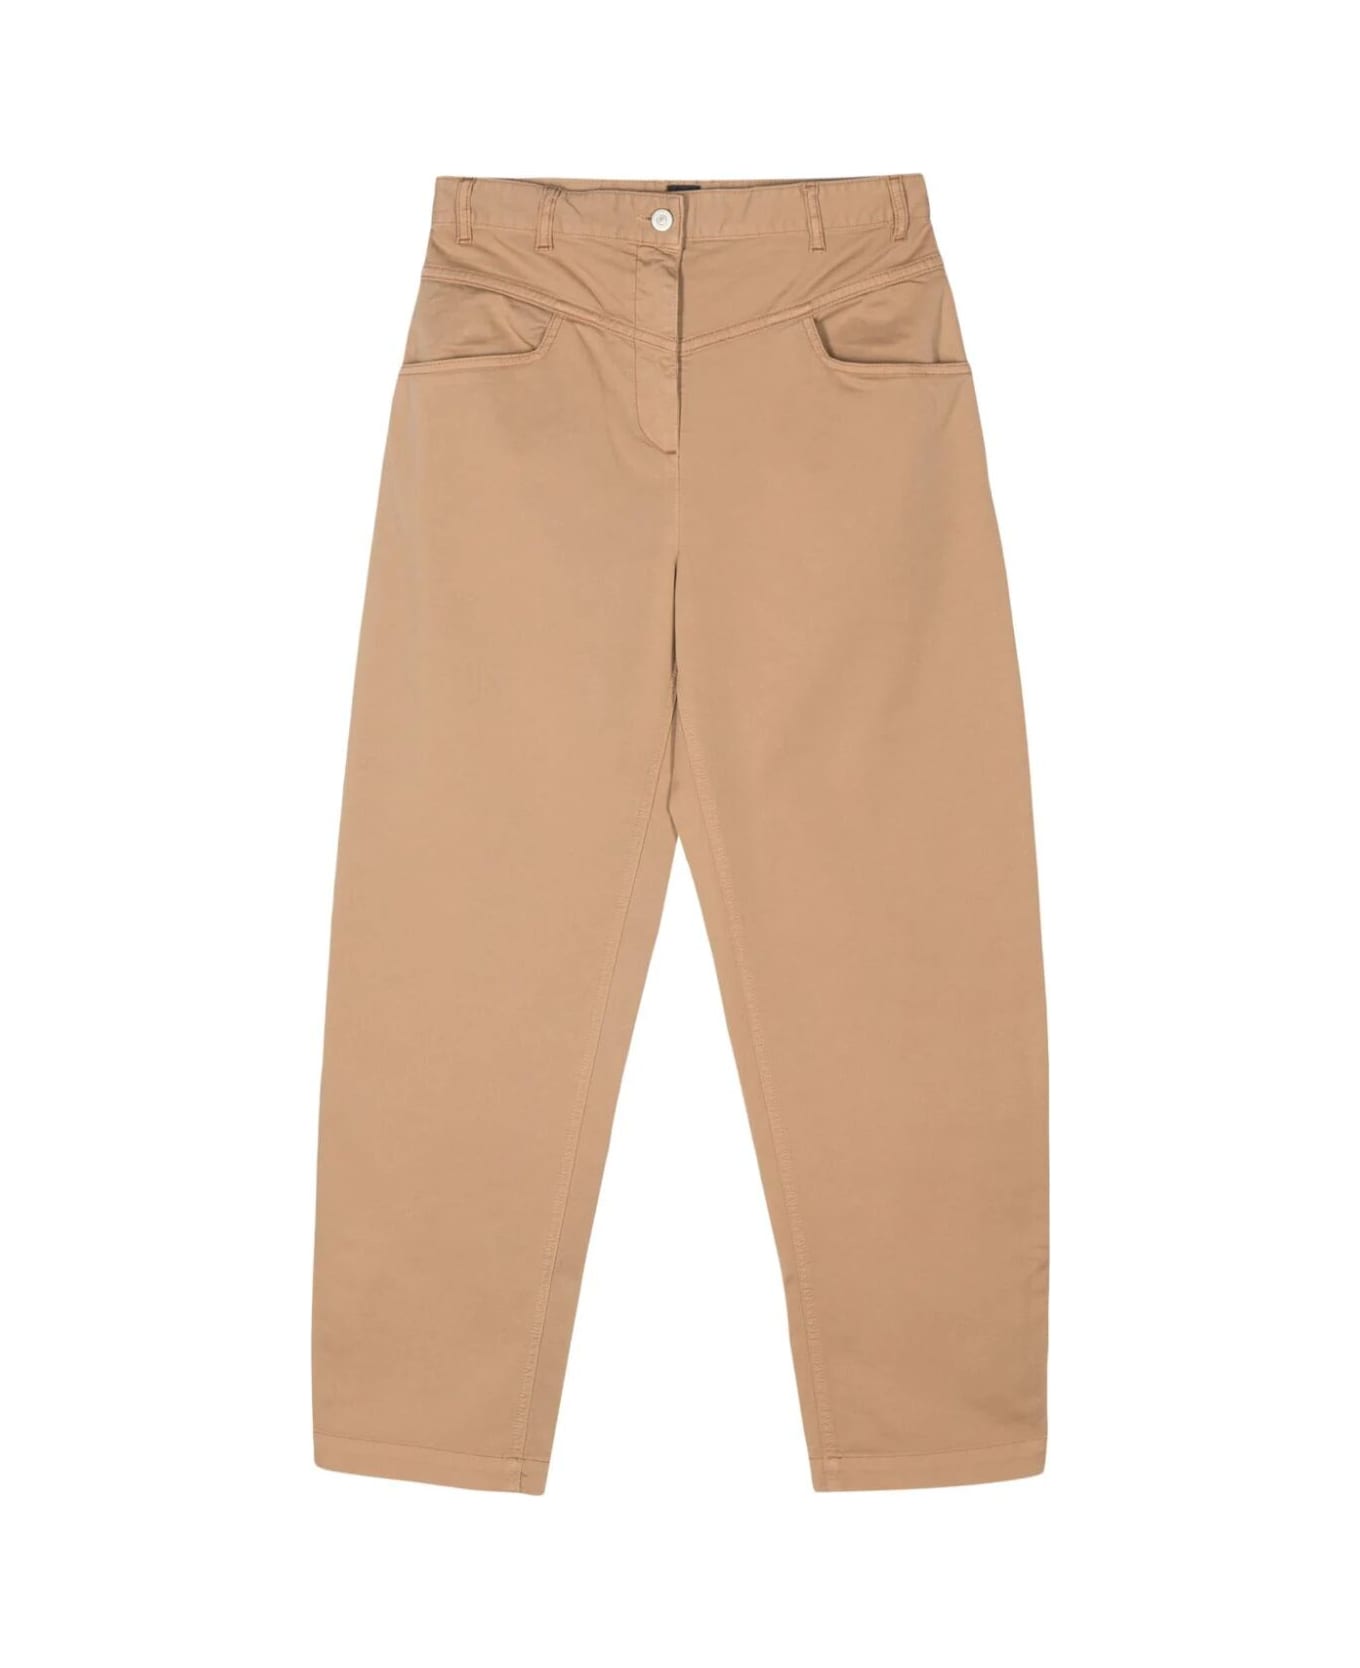 PS by Paul Smith Regular Trouser - Camel